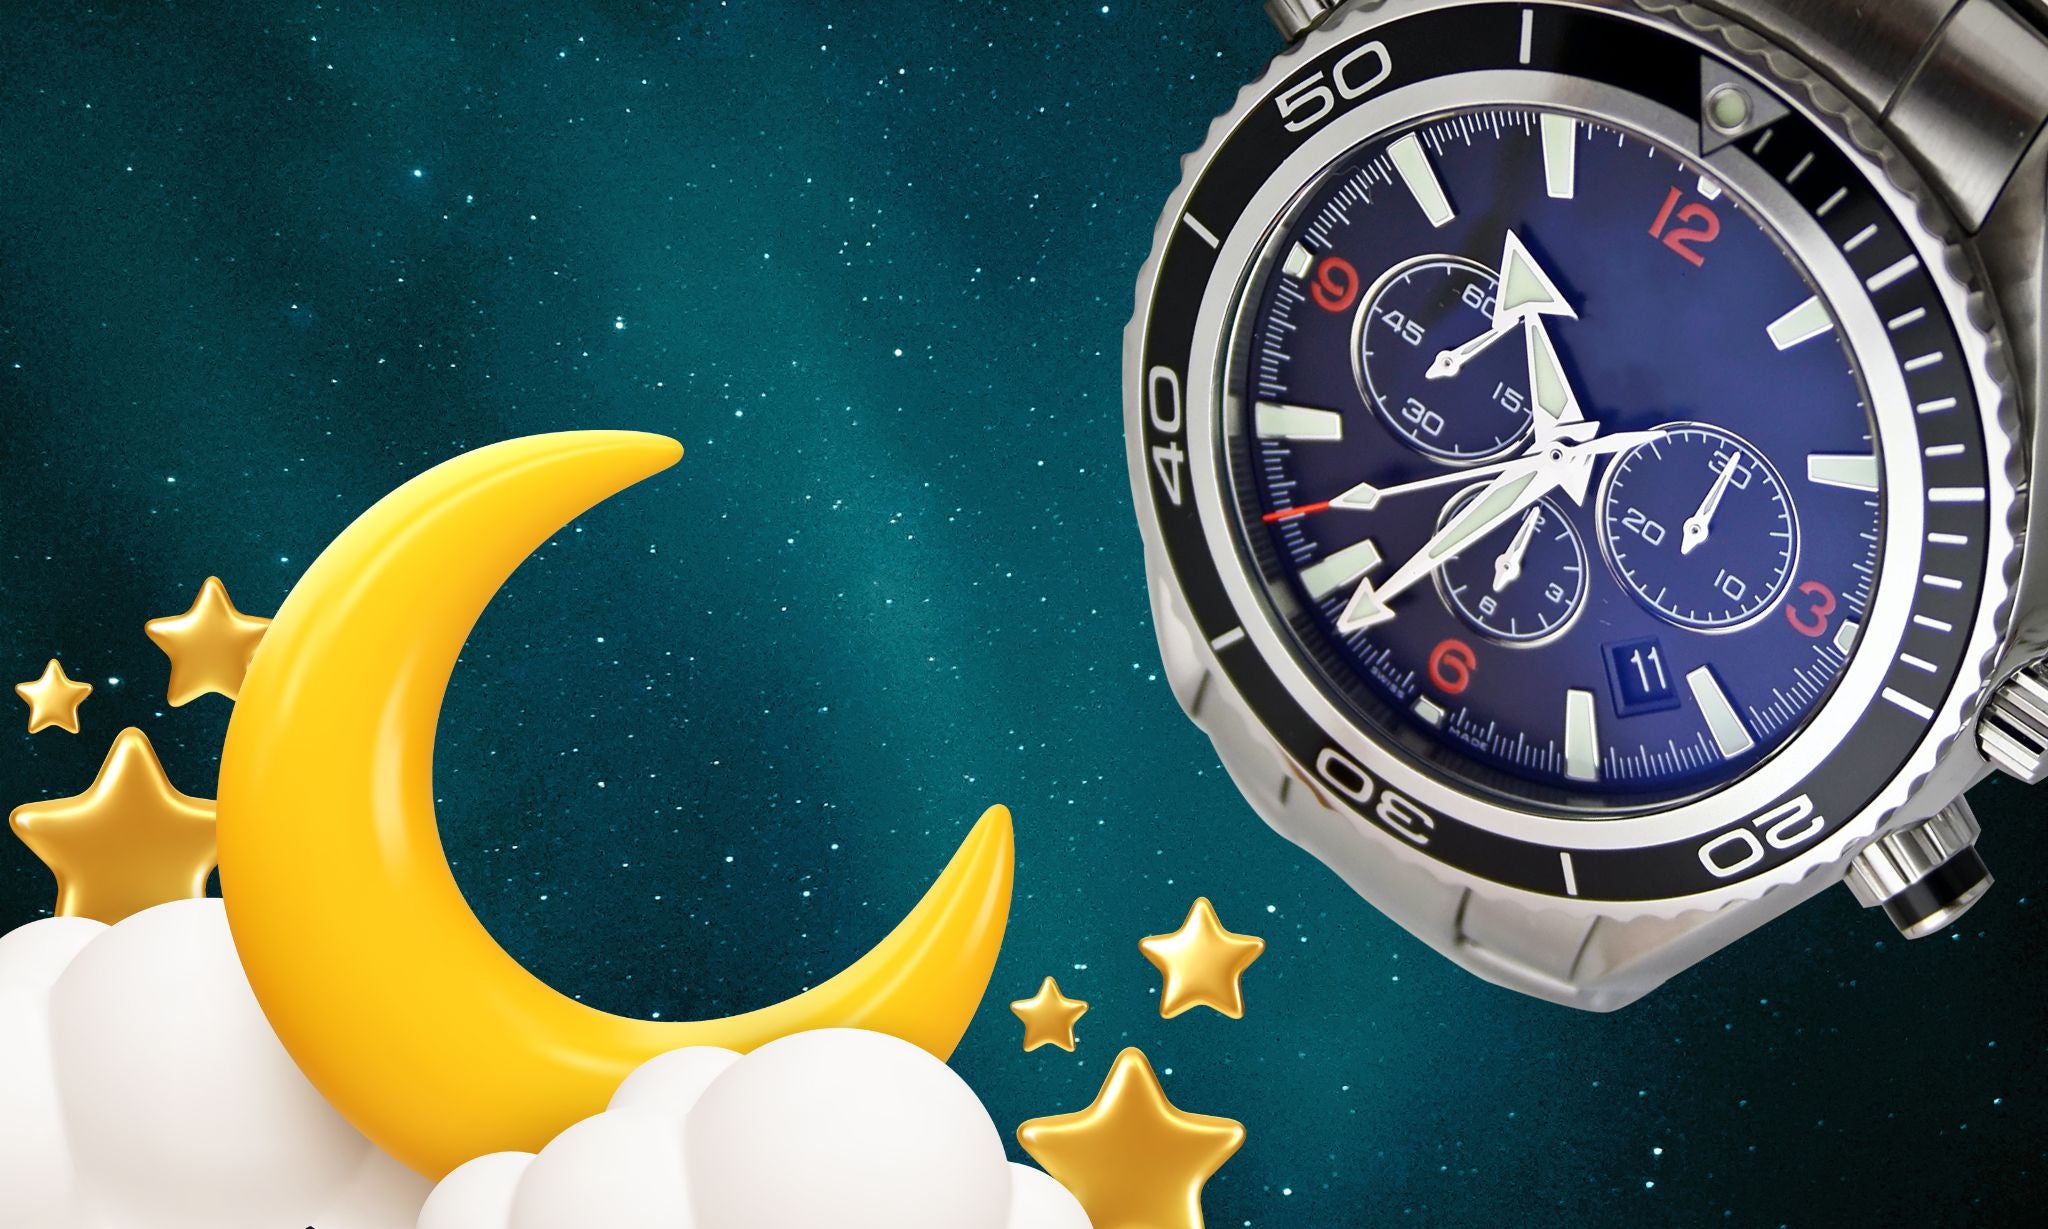 Luxury Moonphase Watches For Men [Watch Reviews]